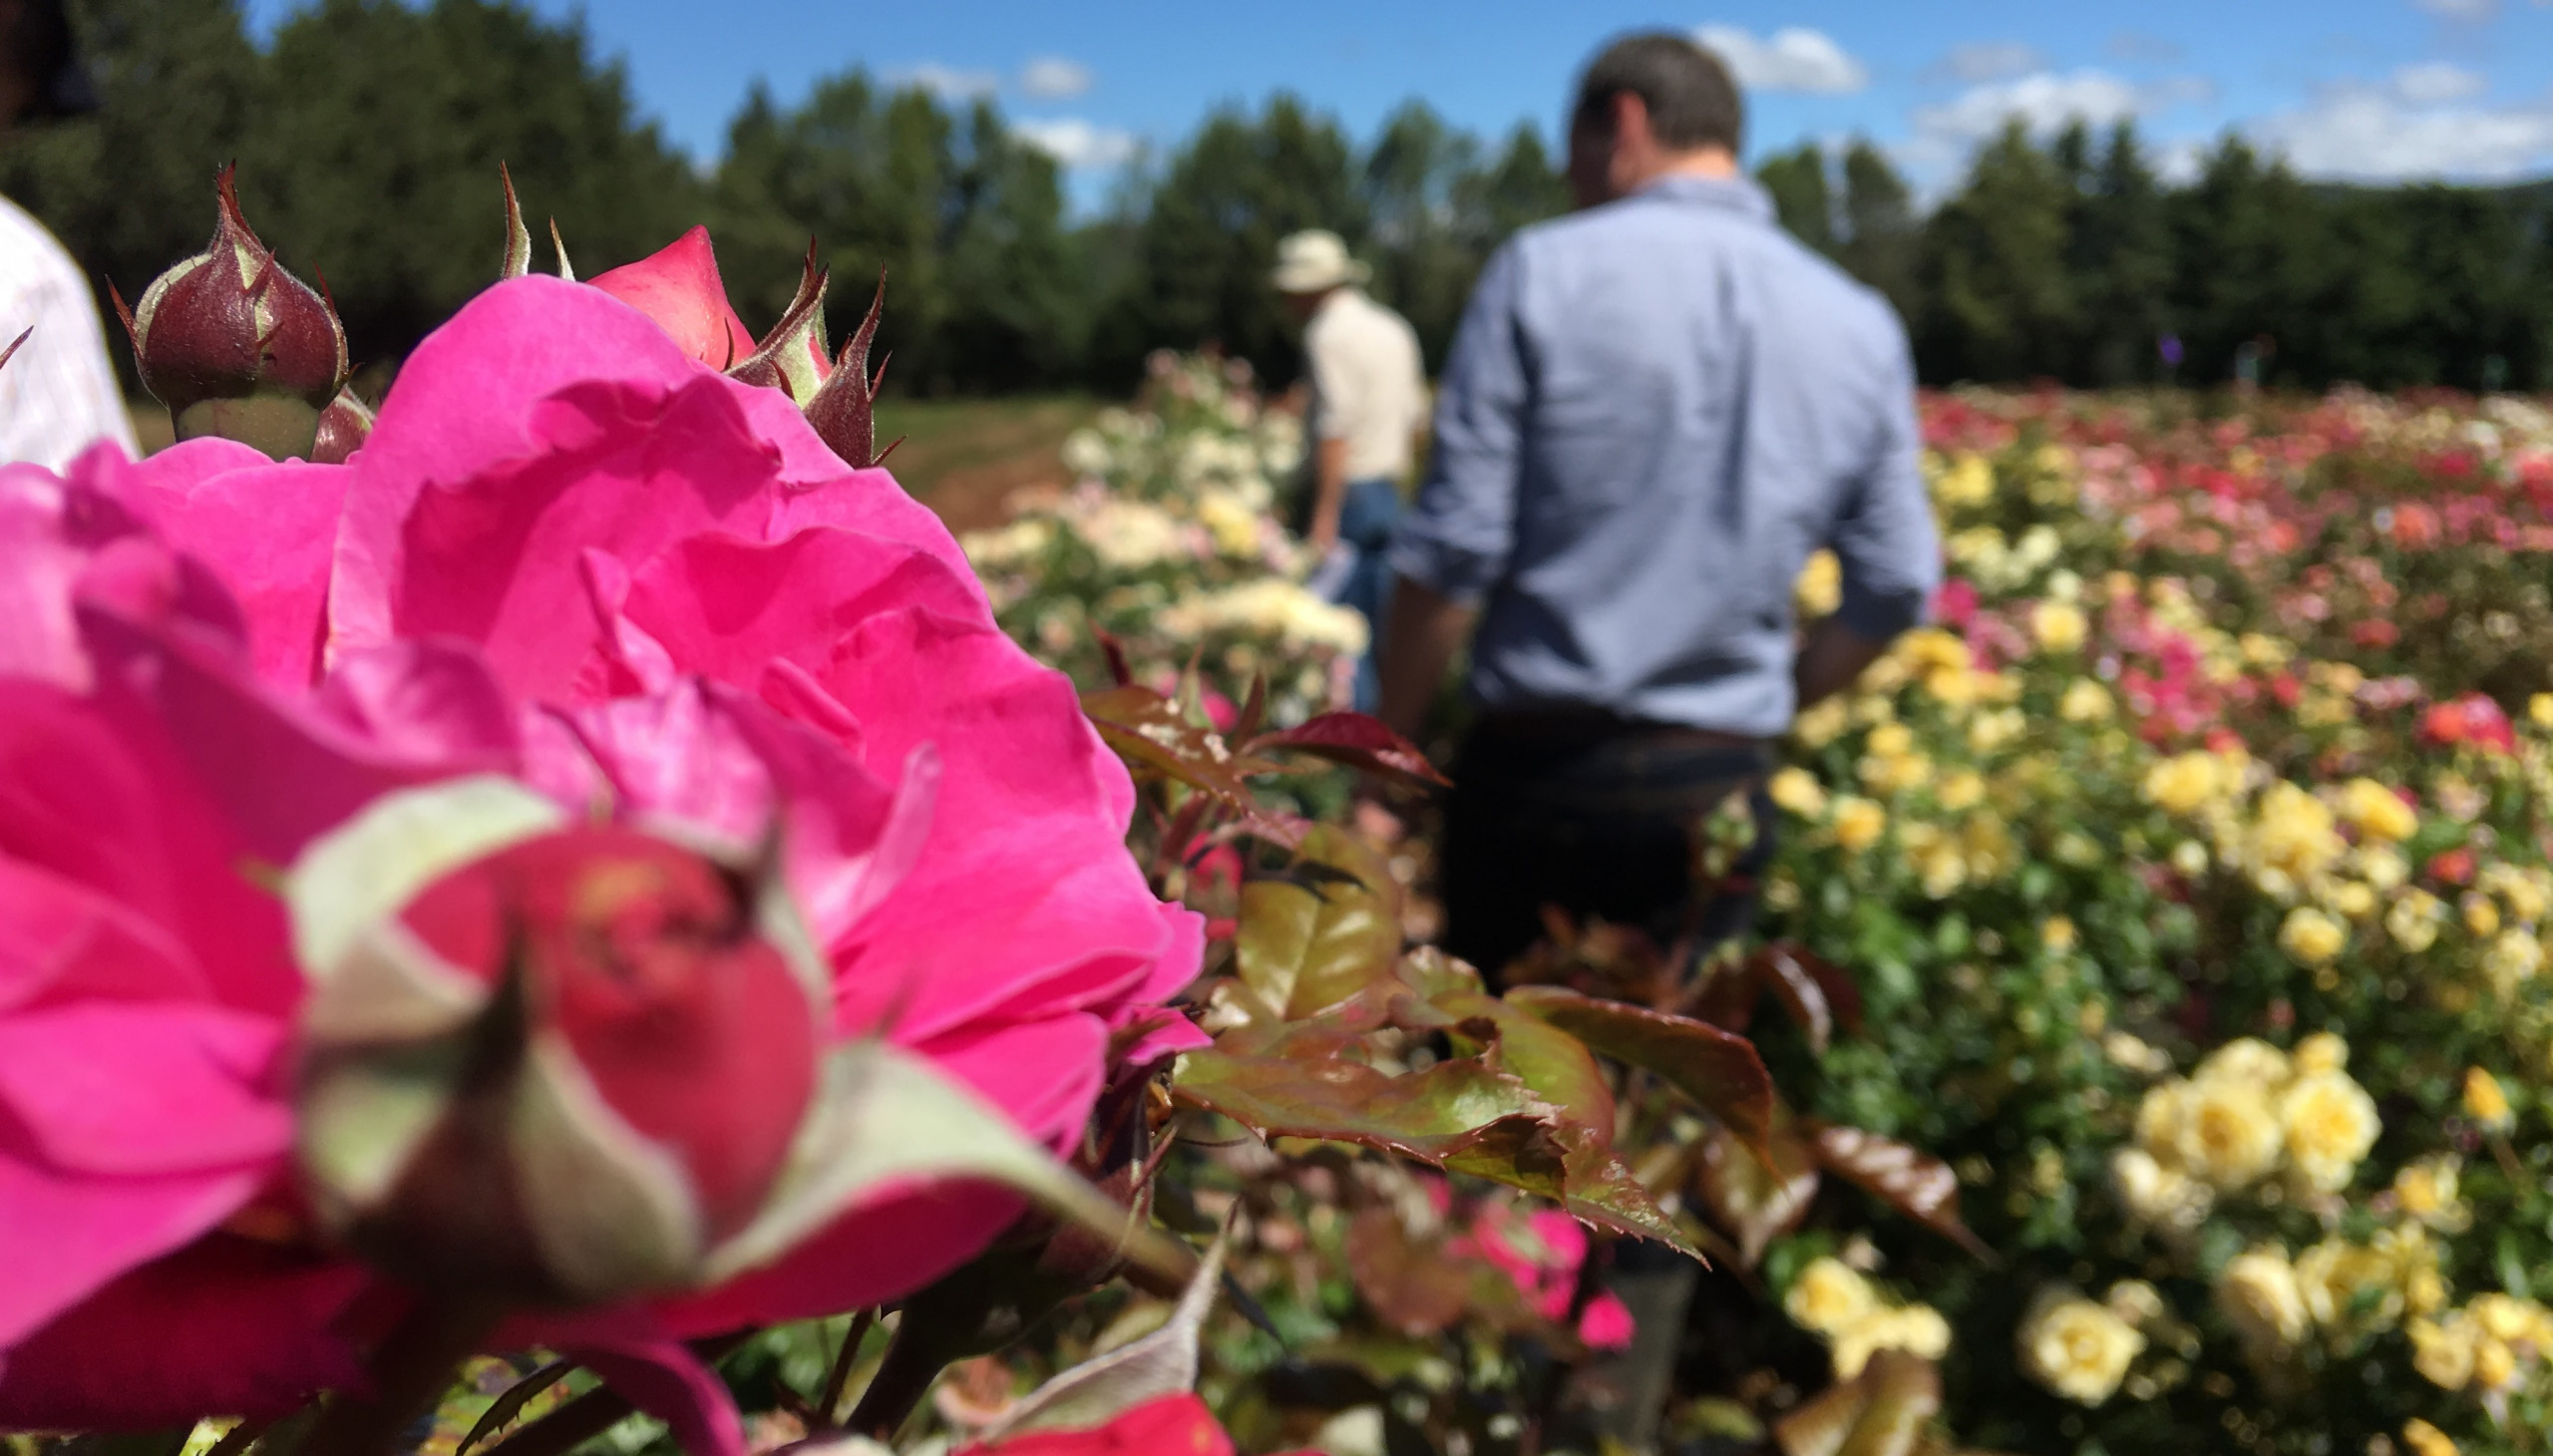 Searching for the perfect scented roses